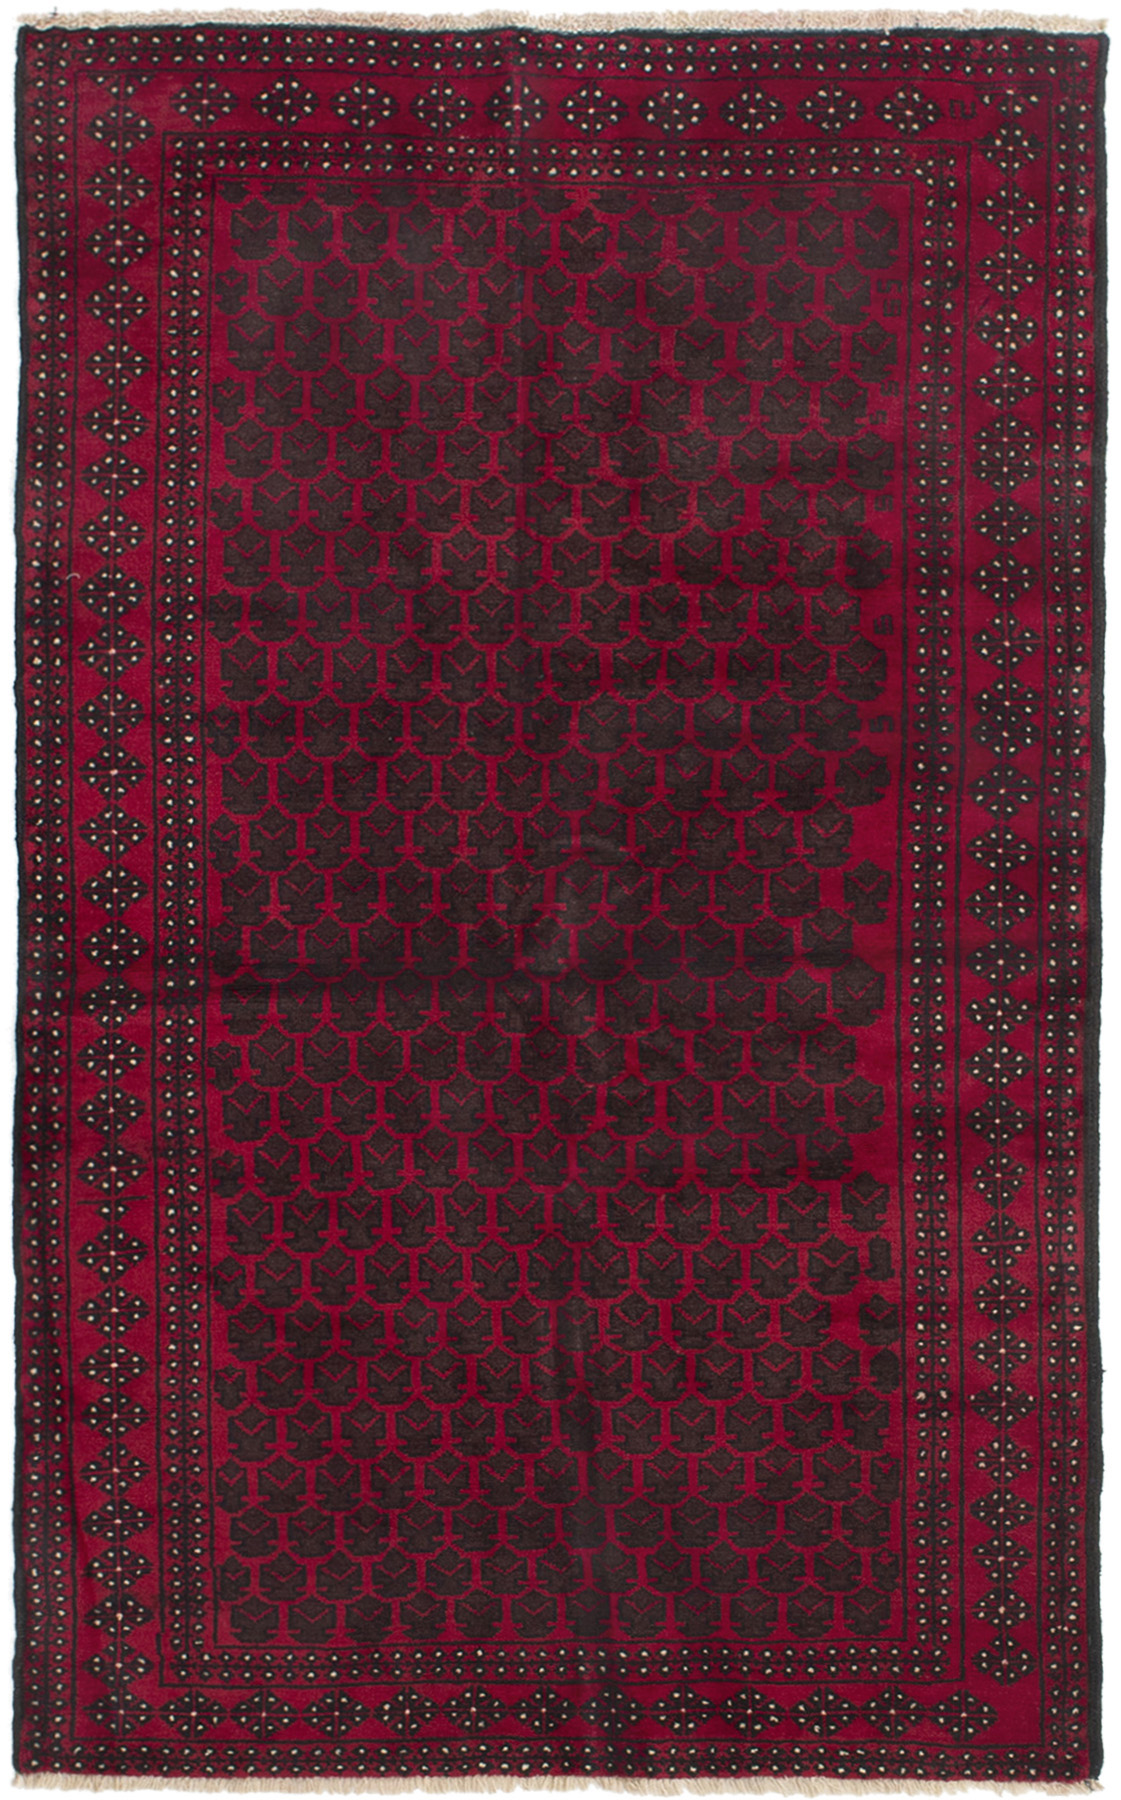 Hand-knotted Teimani Red Wool Rug 3'6" x 6'1"  Size: 3'6" x 6'1"  